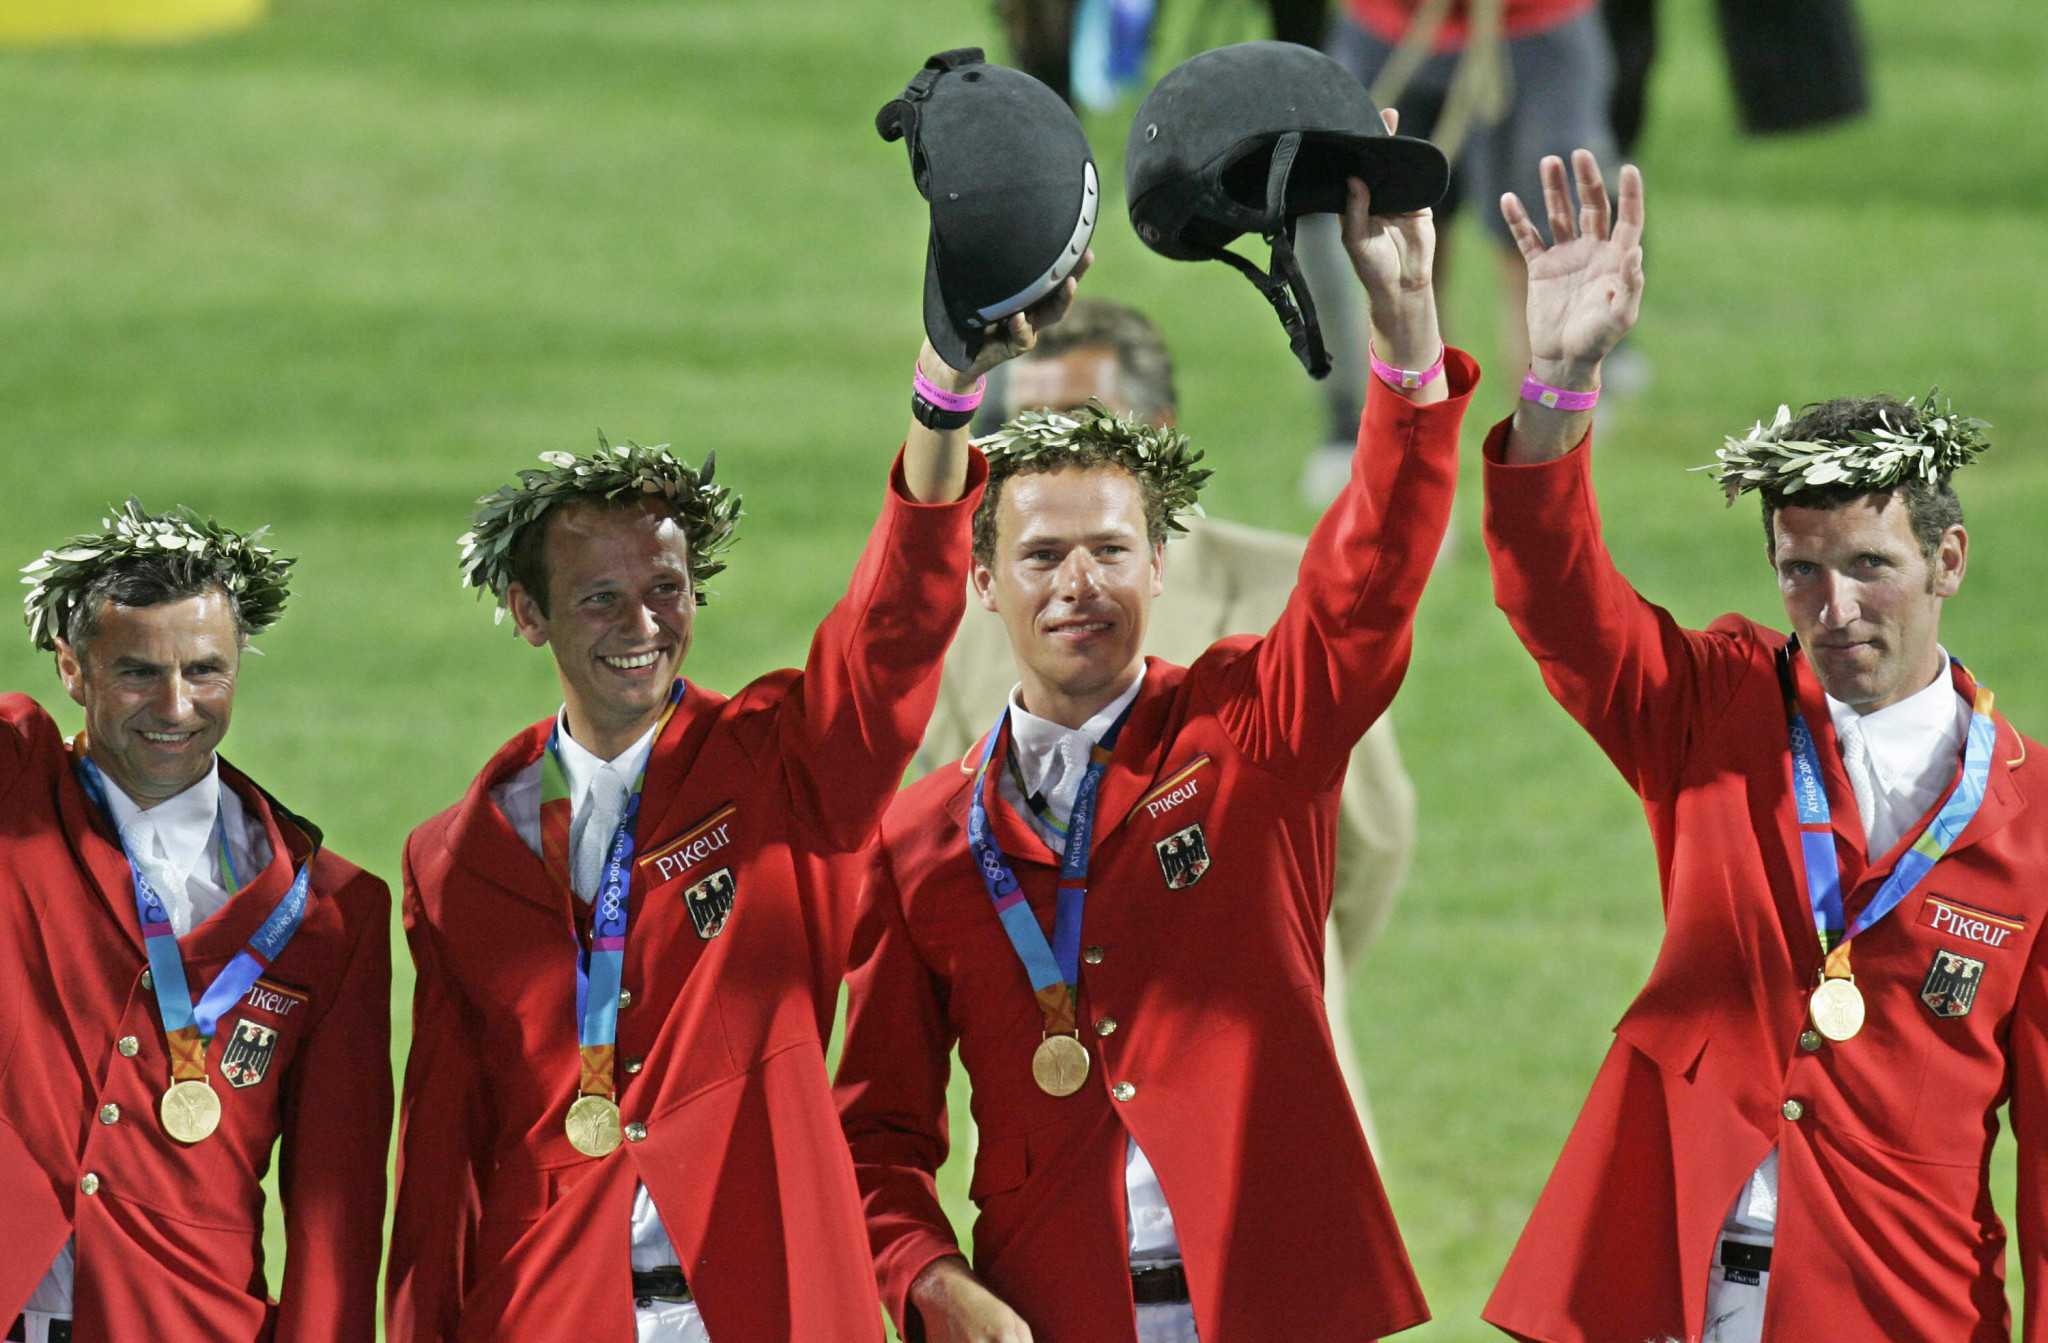 Christian Ahlmann, third from left, was part of the German team that won the Olympic gold medal at Athens 2004 ©Getty Images